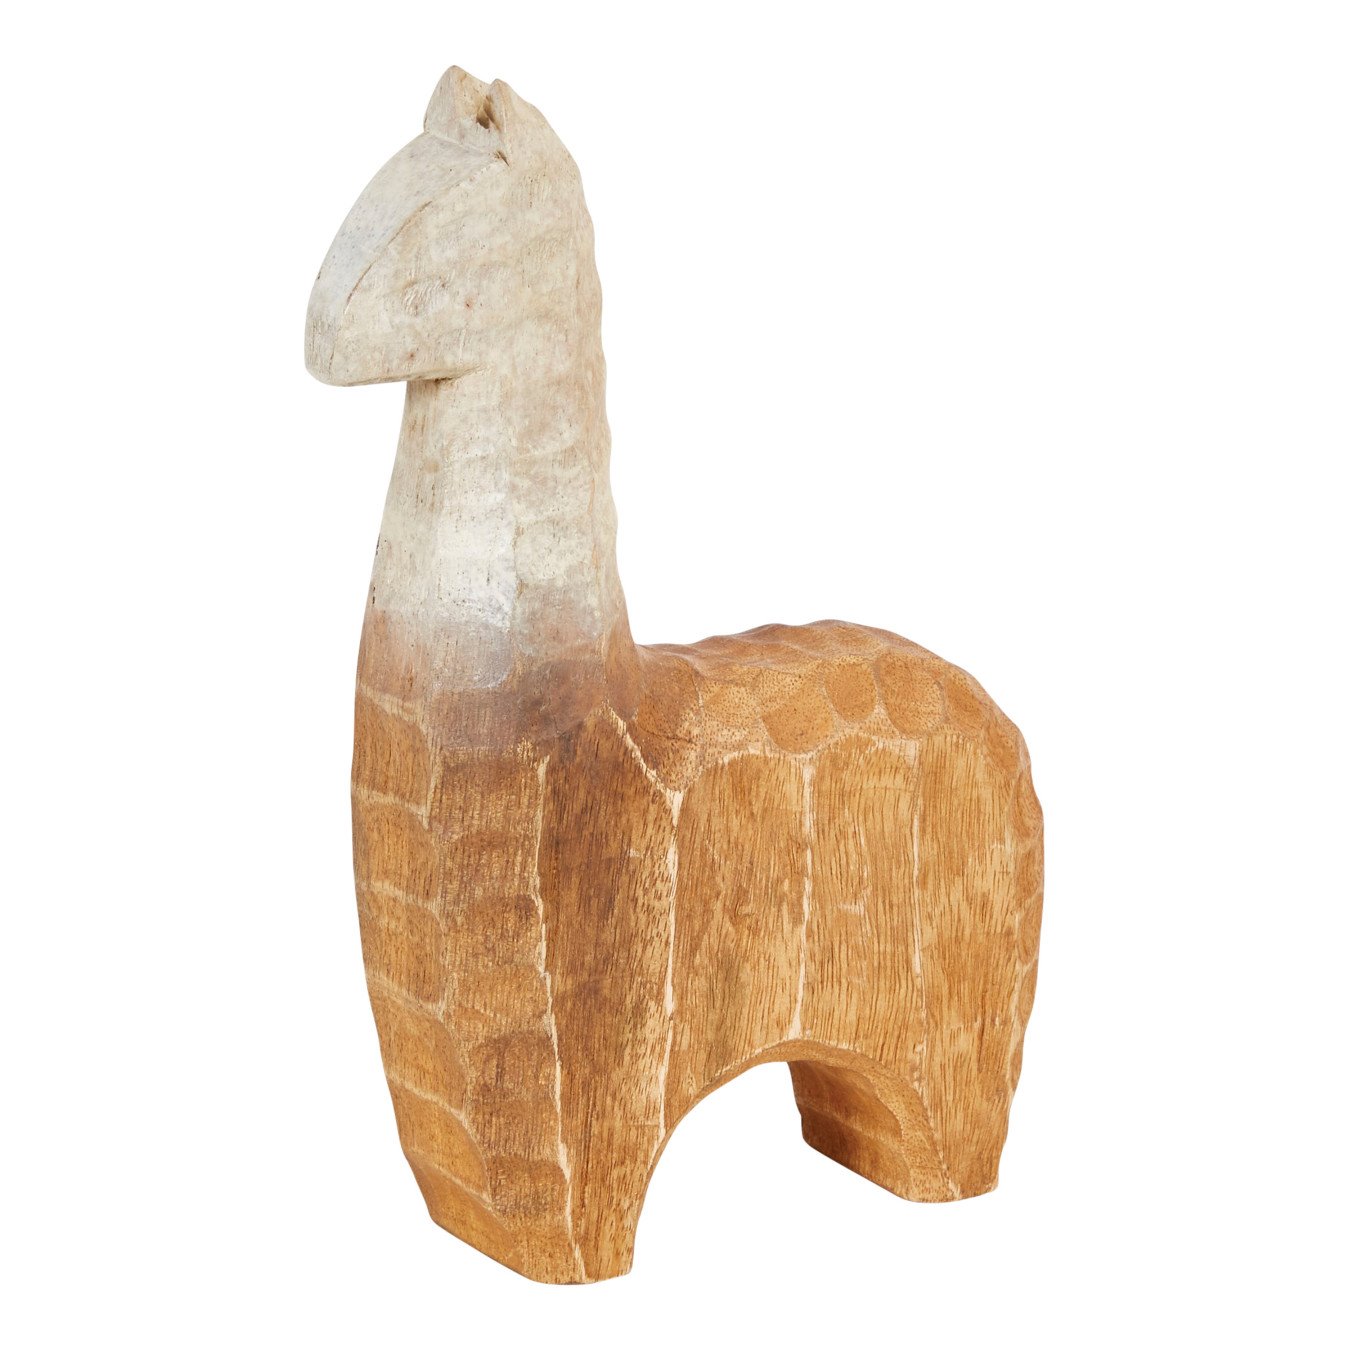 10"H Hand-Carved Mango Wood Llama Figurine with Distressed Ombre Finish